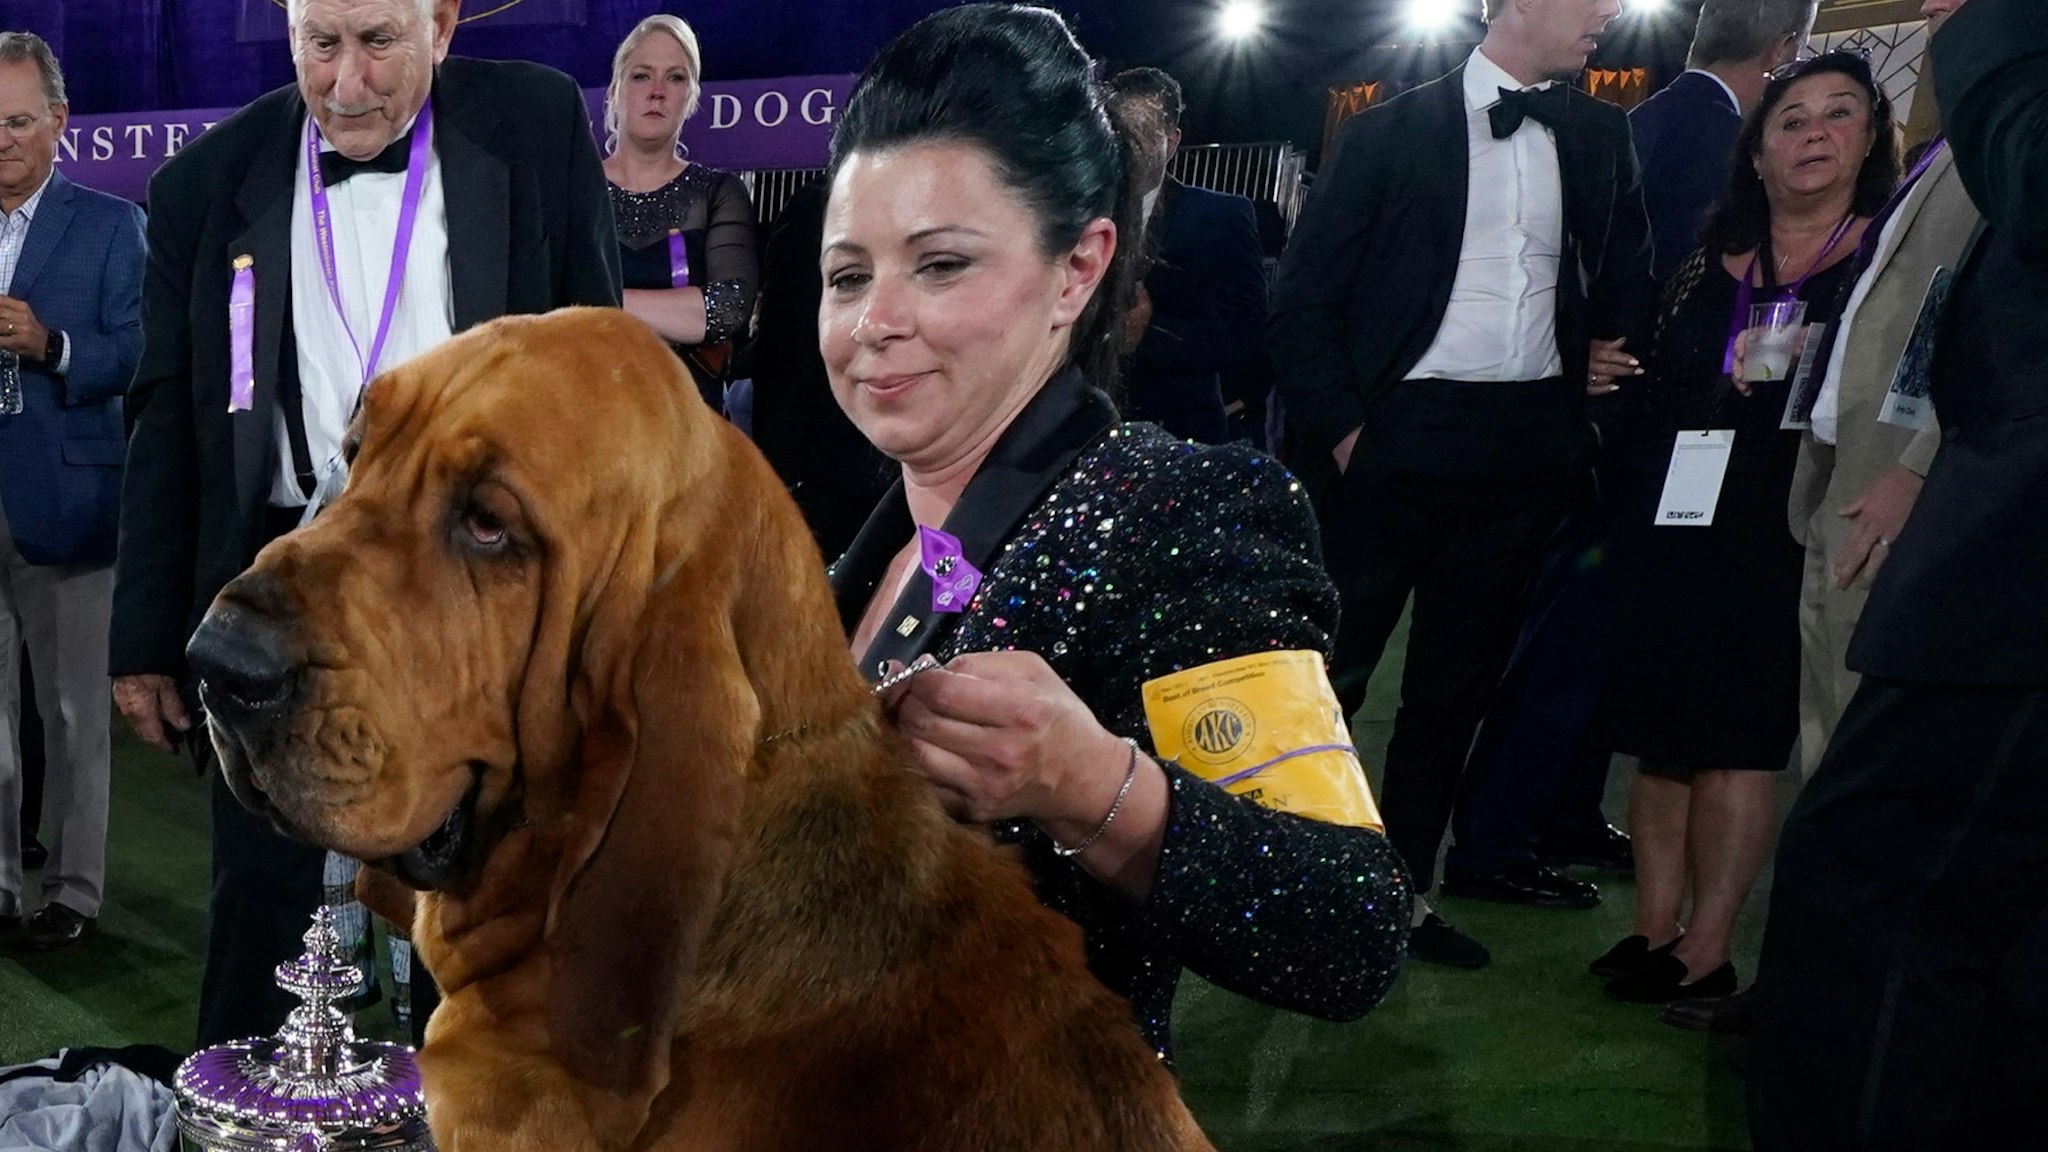 Trumpet the bloodhound poses with breeder and handler Heather Buehner after winning Best in Show at the 146th Westminster Kennel Club Dog Show at the Lyndhurst Mansion, in Tarrytown, New York, on June 22, 2022.